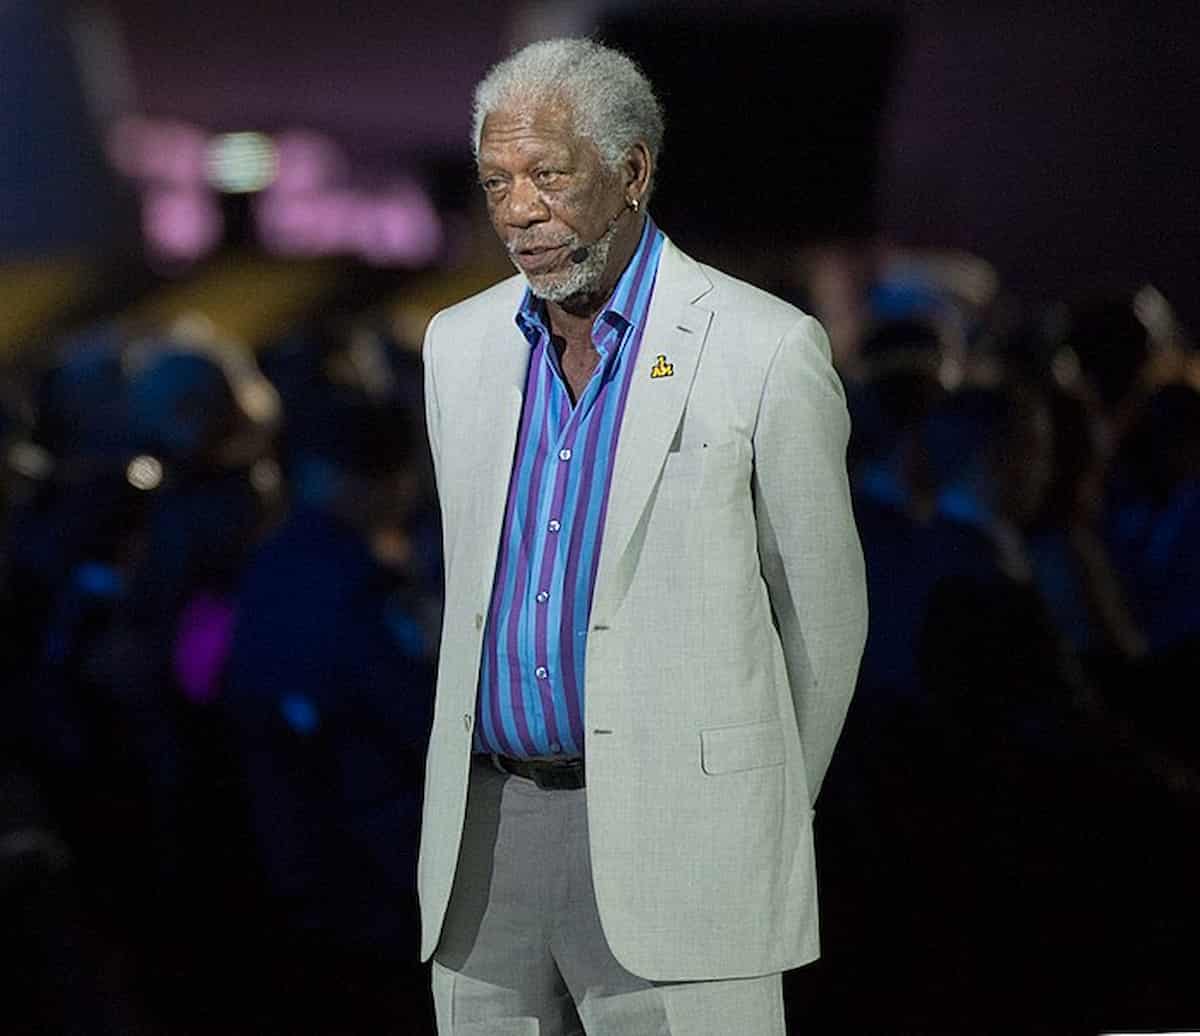 spotcovery-academy-award-winning-actor-morgan-freeman-narrates-for-the-opening-ceremony-to-the-2016-invictus-games-in-orlando-black-celebs-who-achieved-remarkable-success-later-in-life